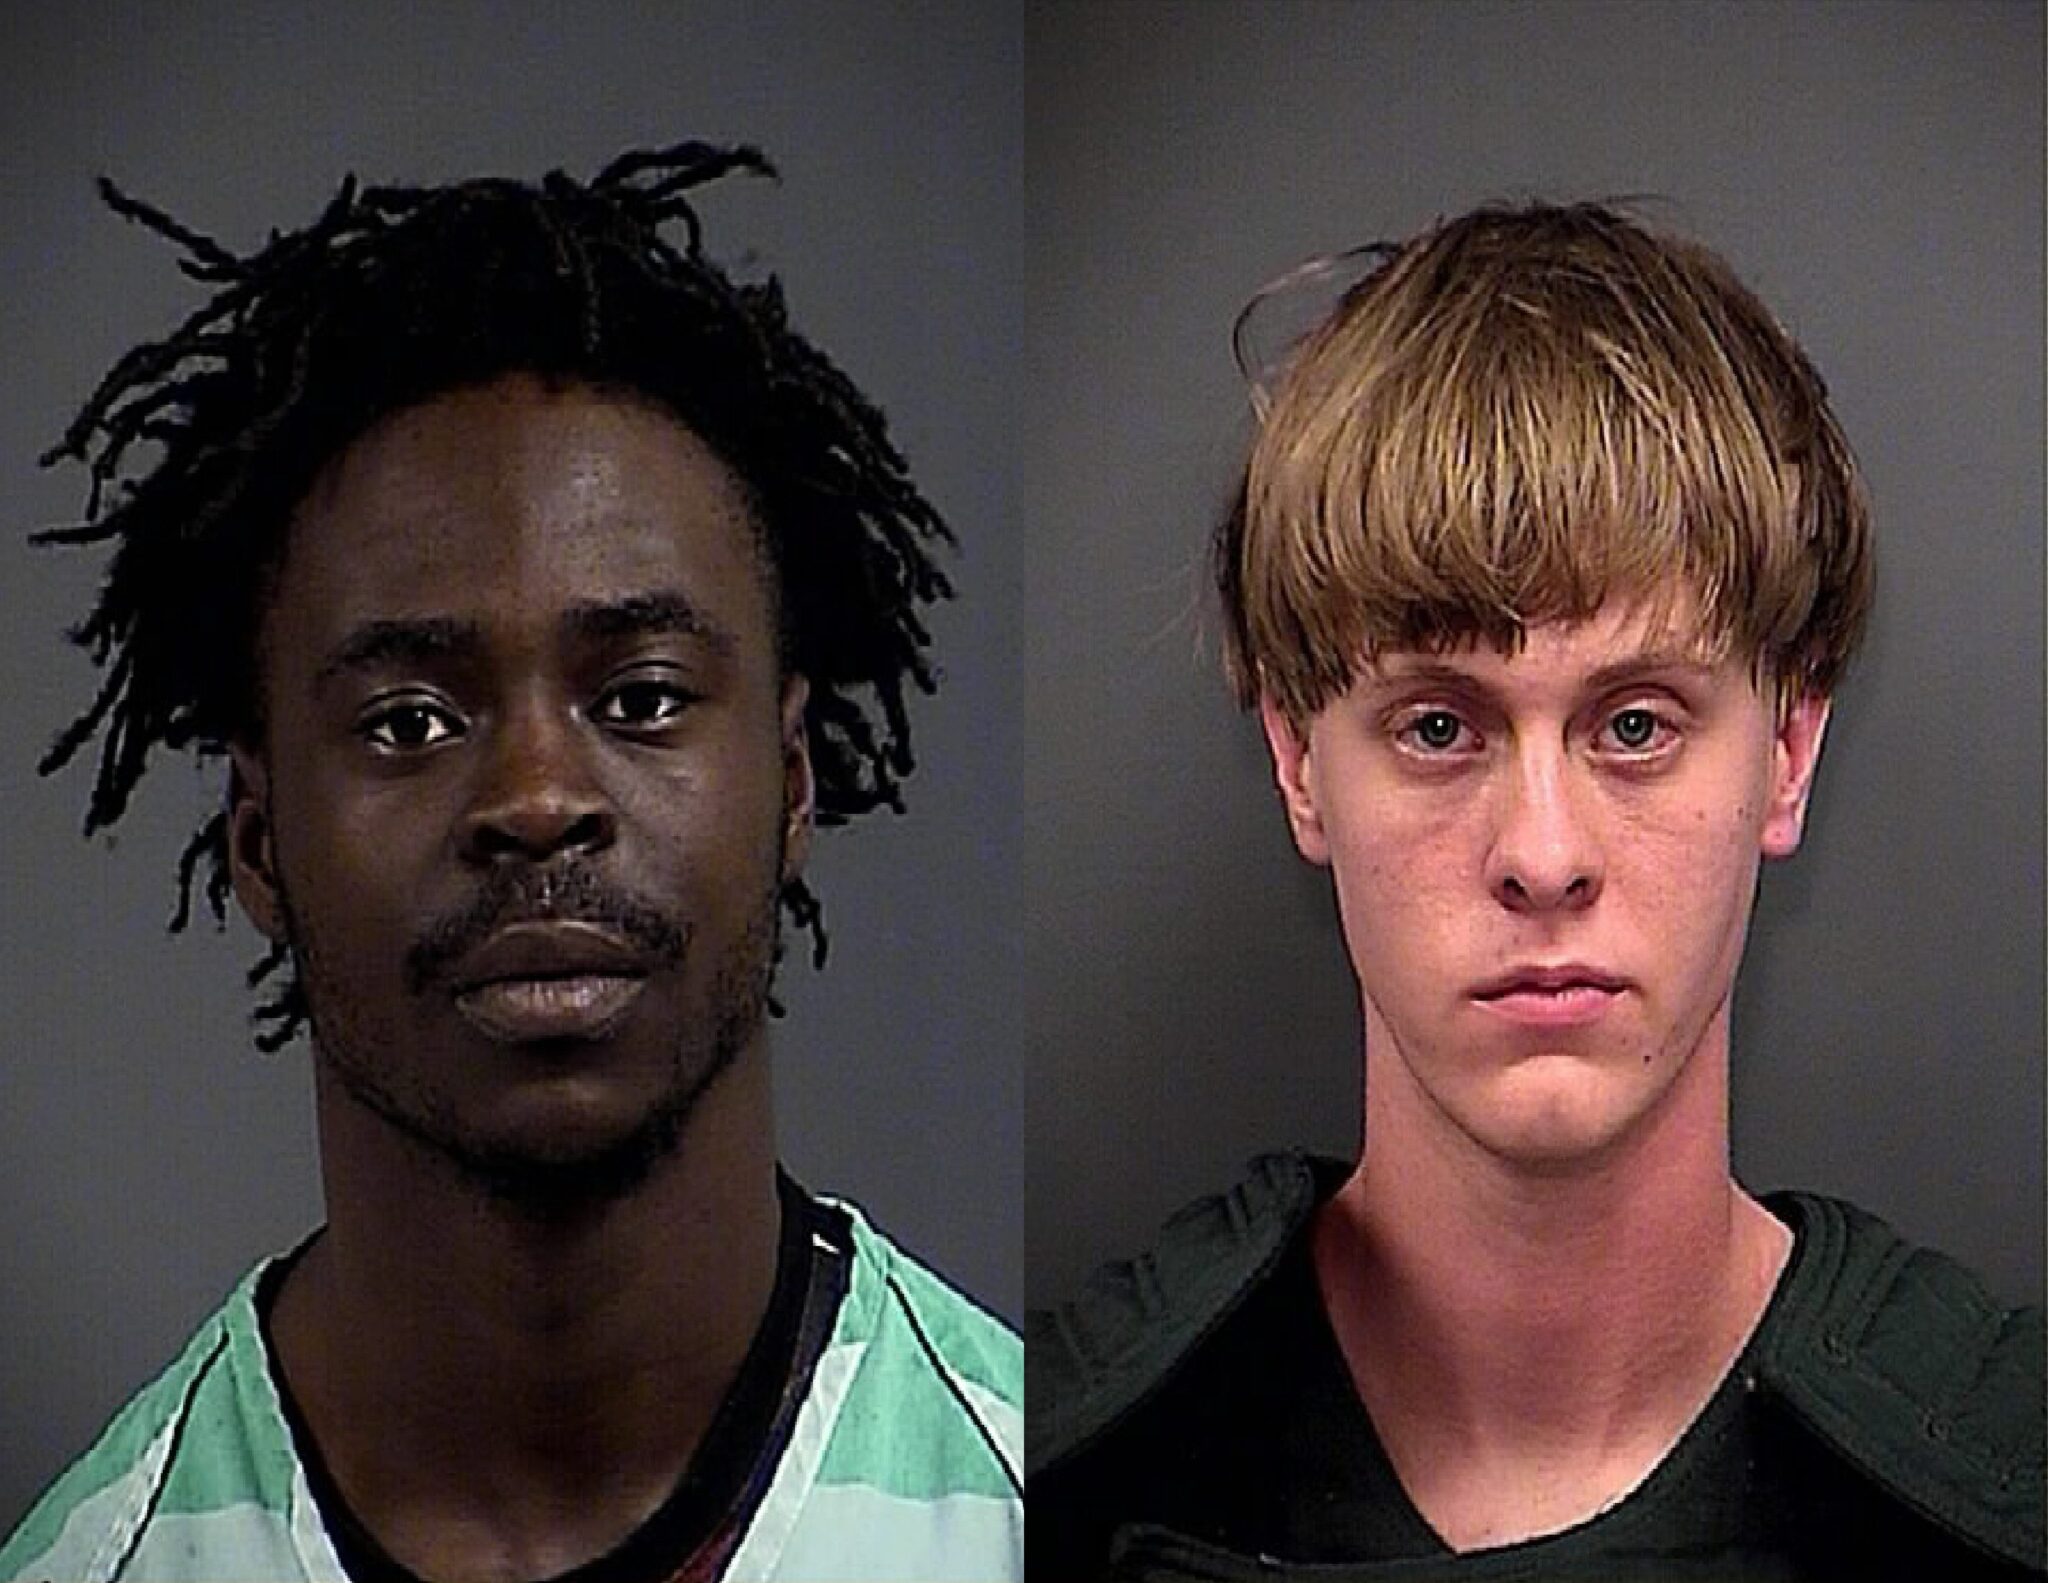 Pictured L to R: Dwayne Stafford and Dylann Roof